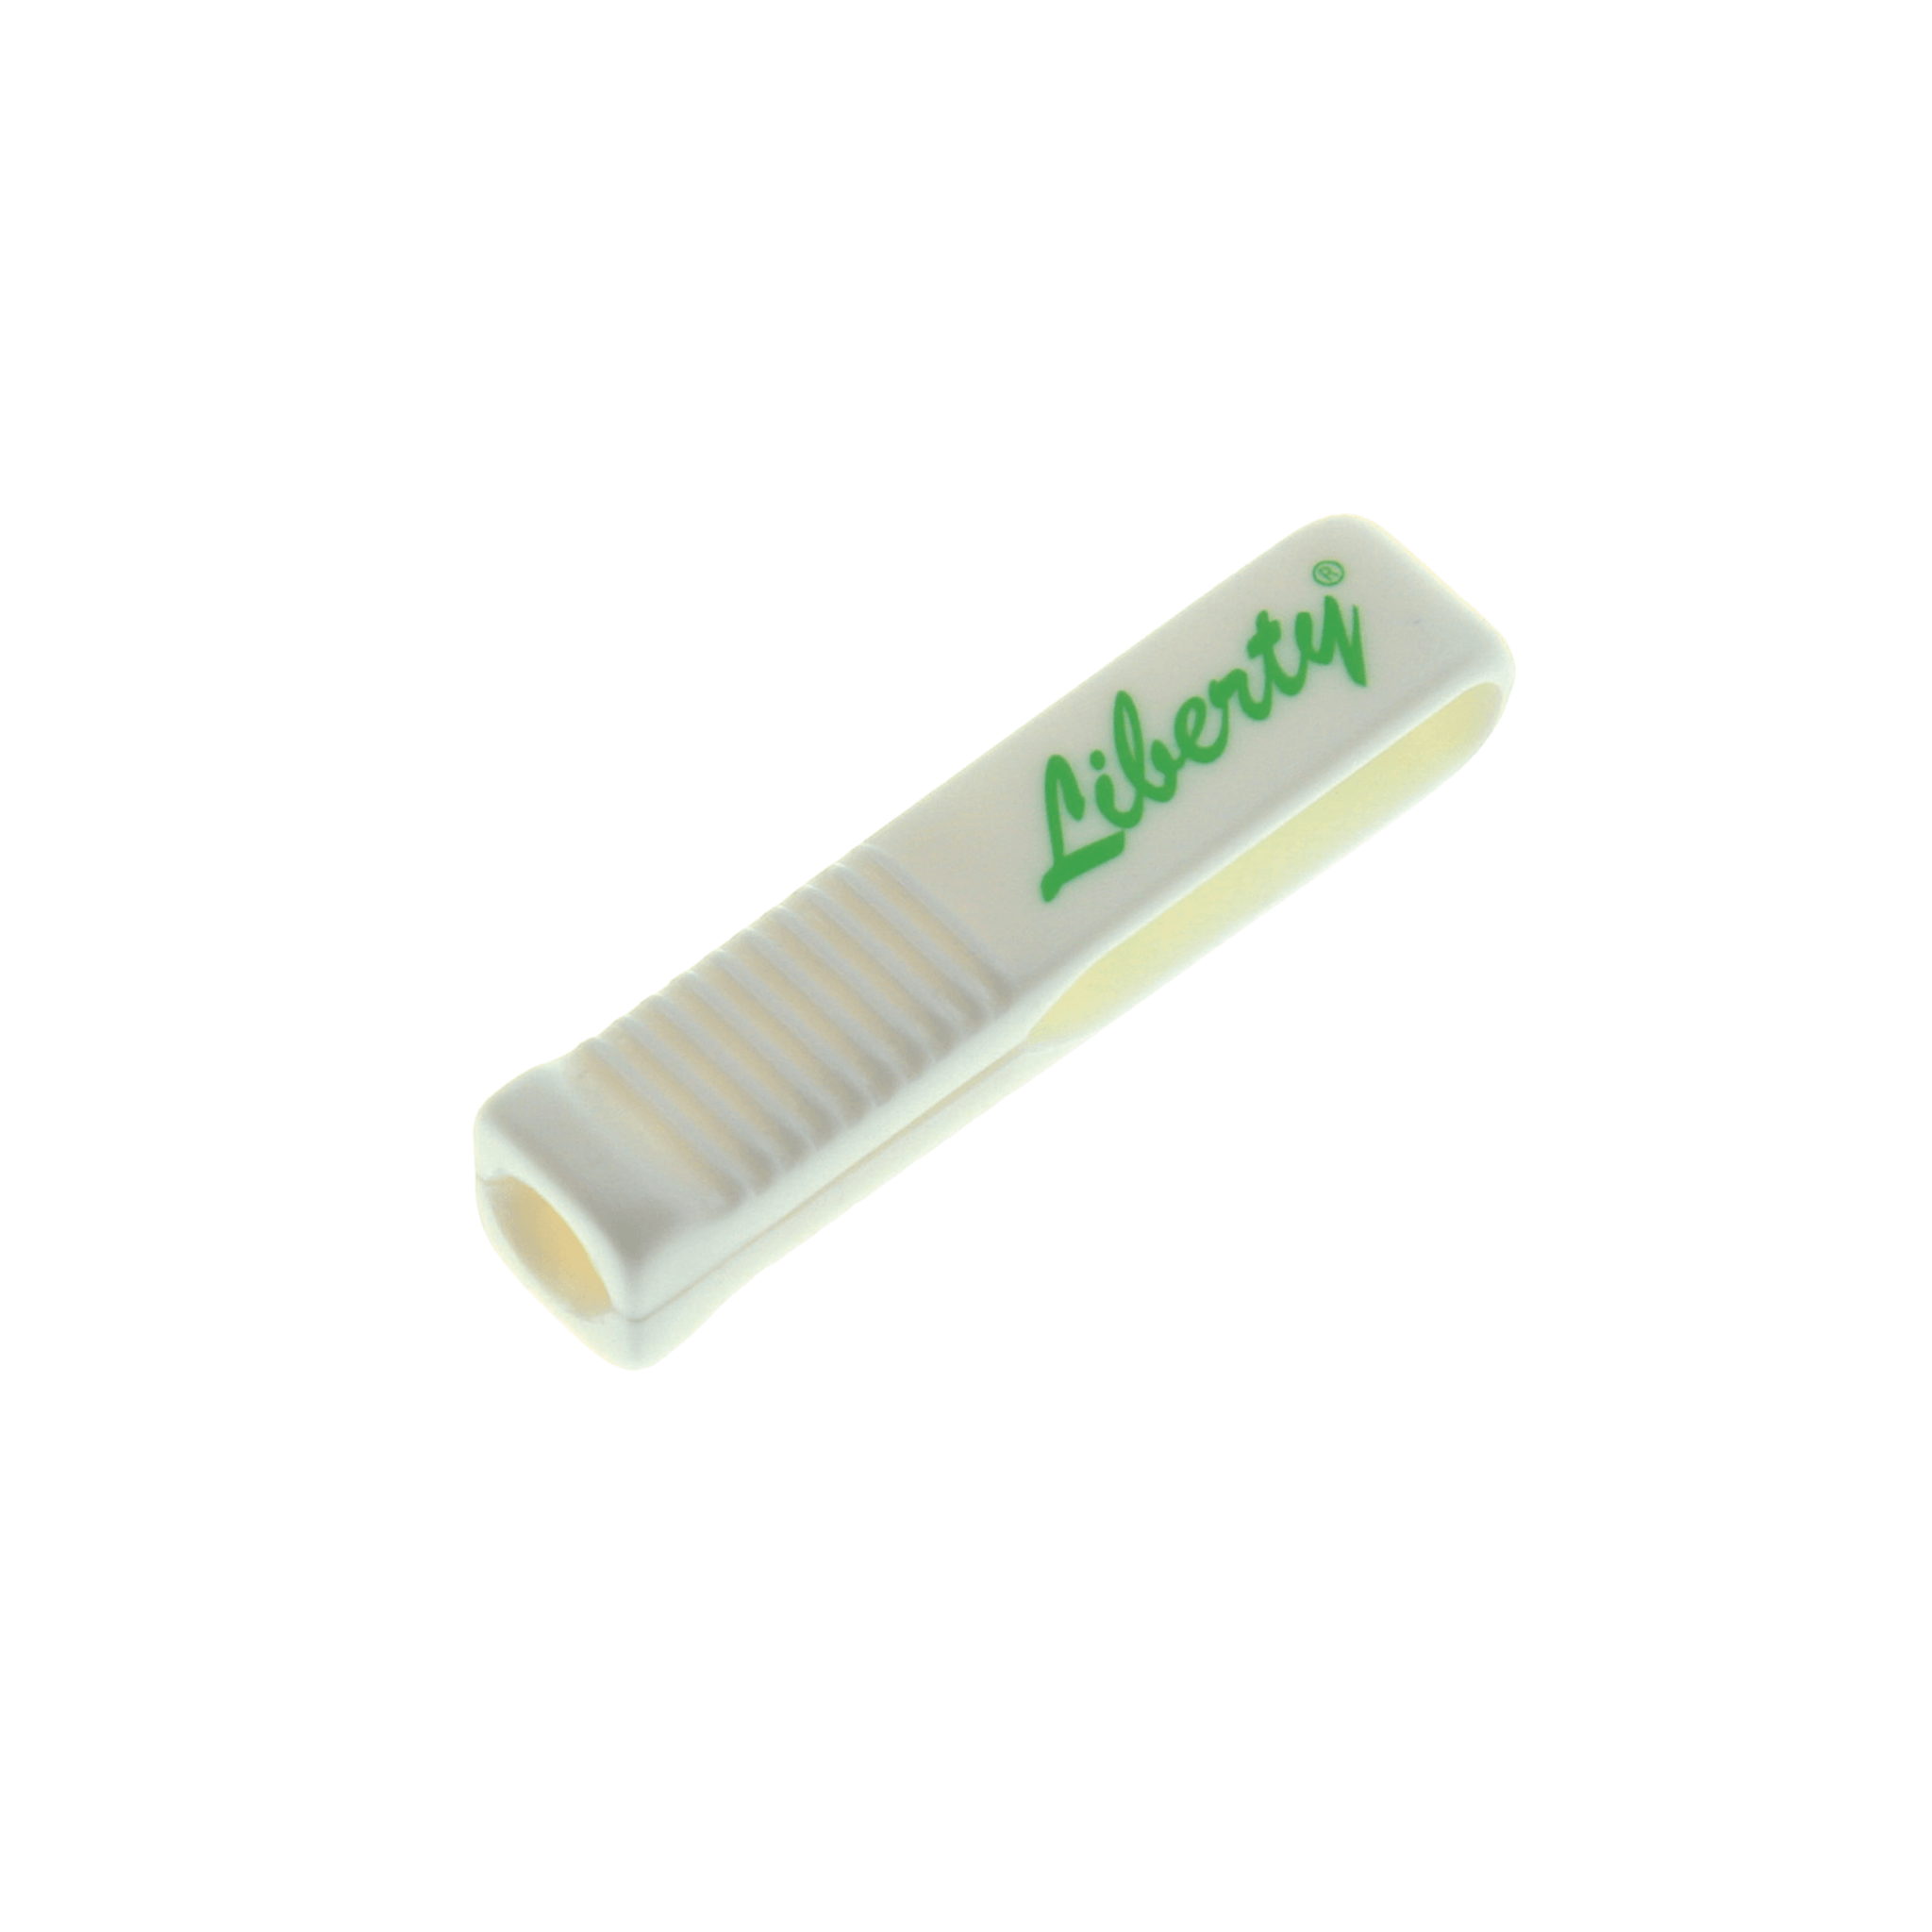 Vial Opener- Suitable for 1- 10 ml